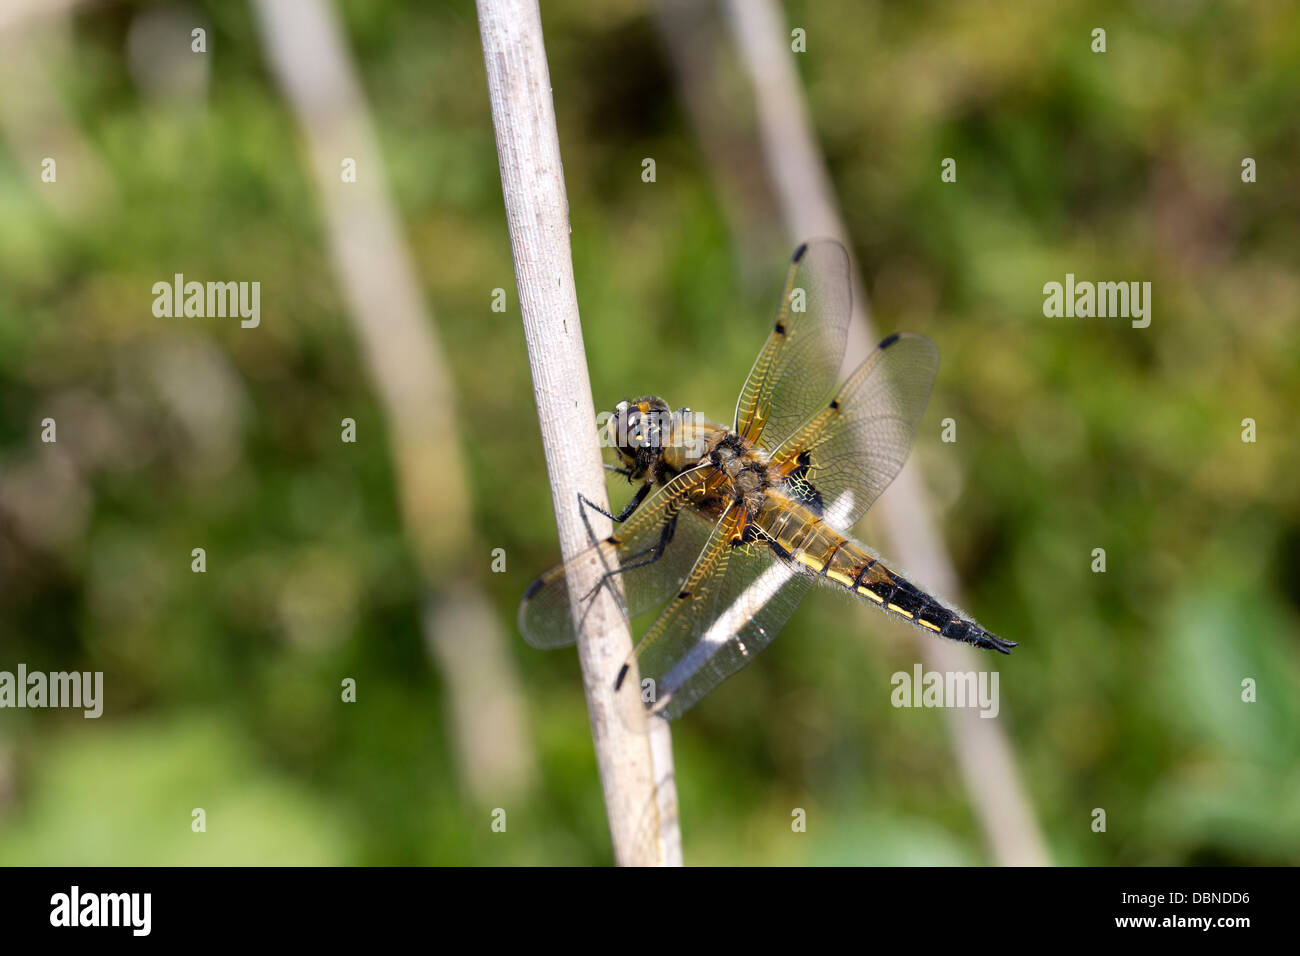 Four Spotted Chaser; Libellula quadrimaculata; Dragonfly; Cornwall; UK Stock Photo